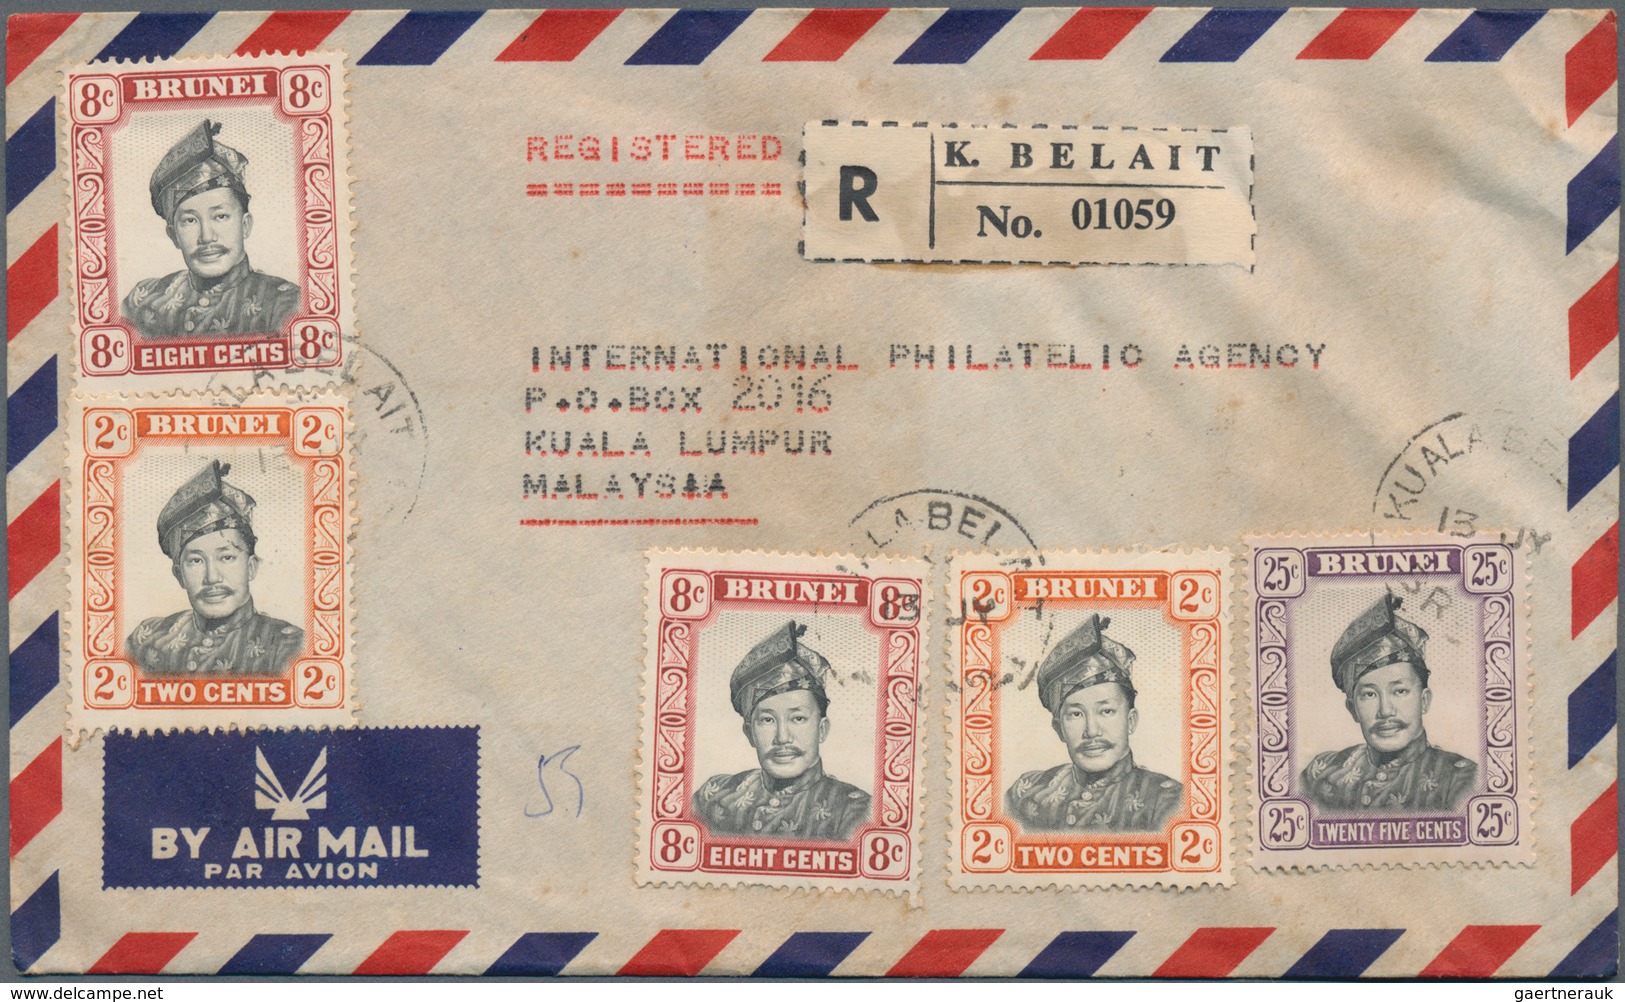 Brunei: 1946/73, foreign covers (24 inc. 8 registered) to England, Malaysia and Singapore inc. two 1